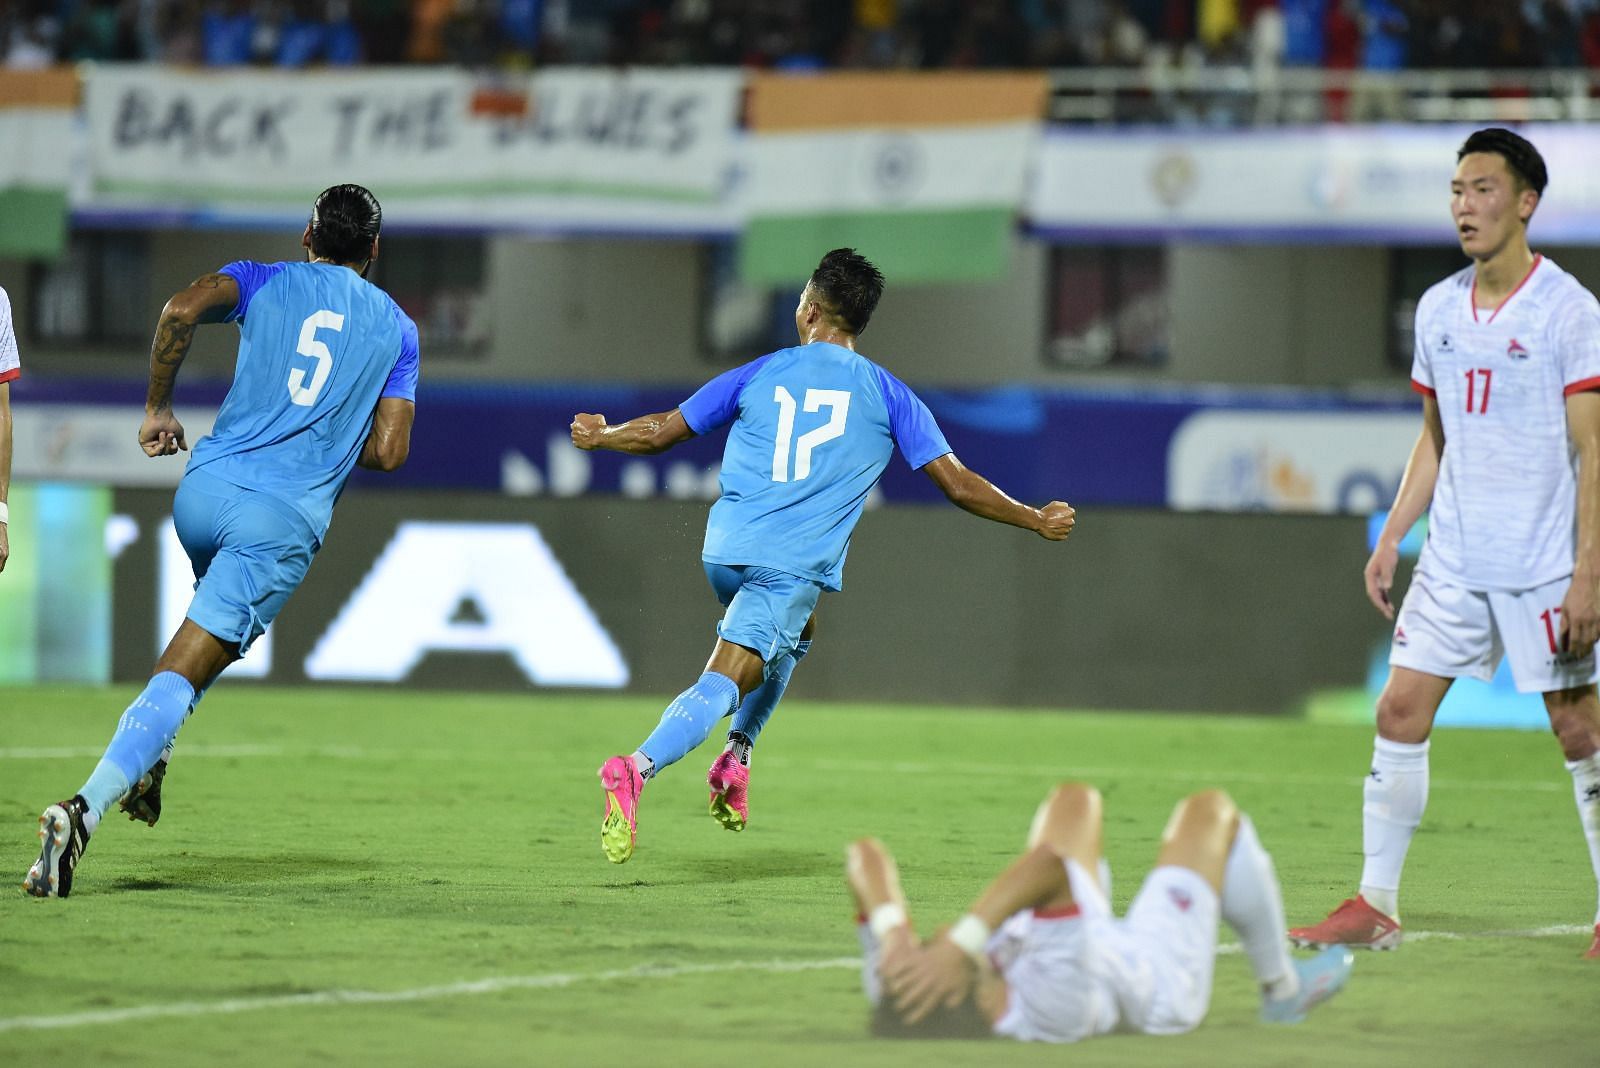 Chhangte scored the second goal of the game (Image courtesy: AIFF Media)